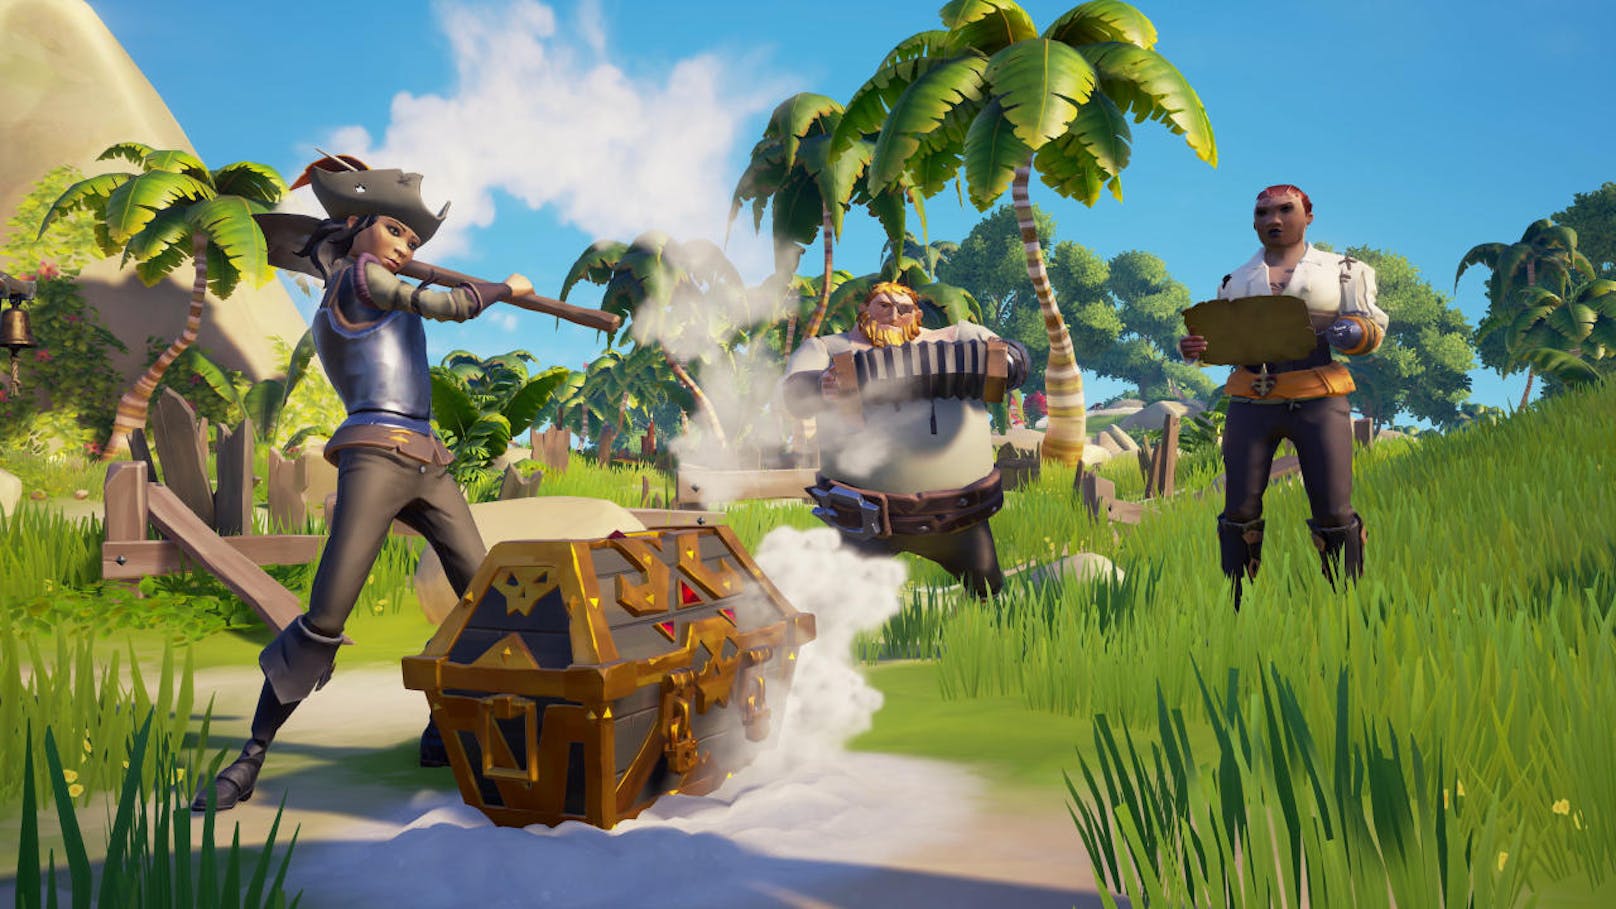  <a href="https://www.heute.at/digital/games/story/Sea-of-Thieves-Test-Review-Xbox-One-PC-Nichts-fuer-Landratten-55608969" target="_blank">Sea of Thieves</a>